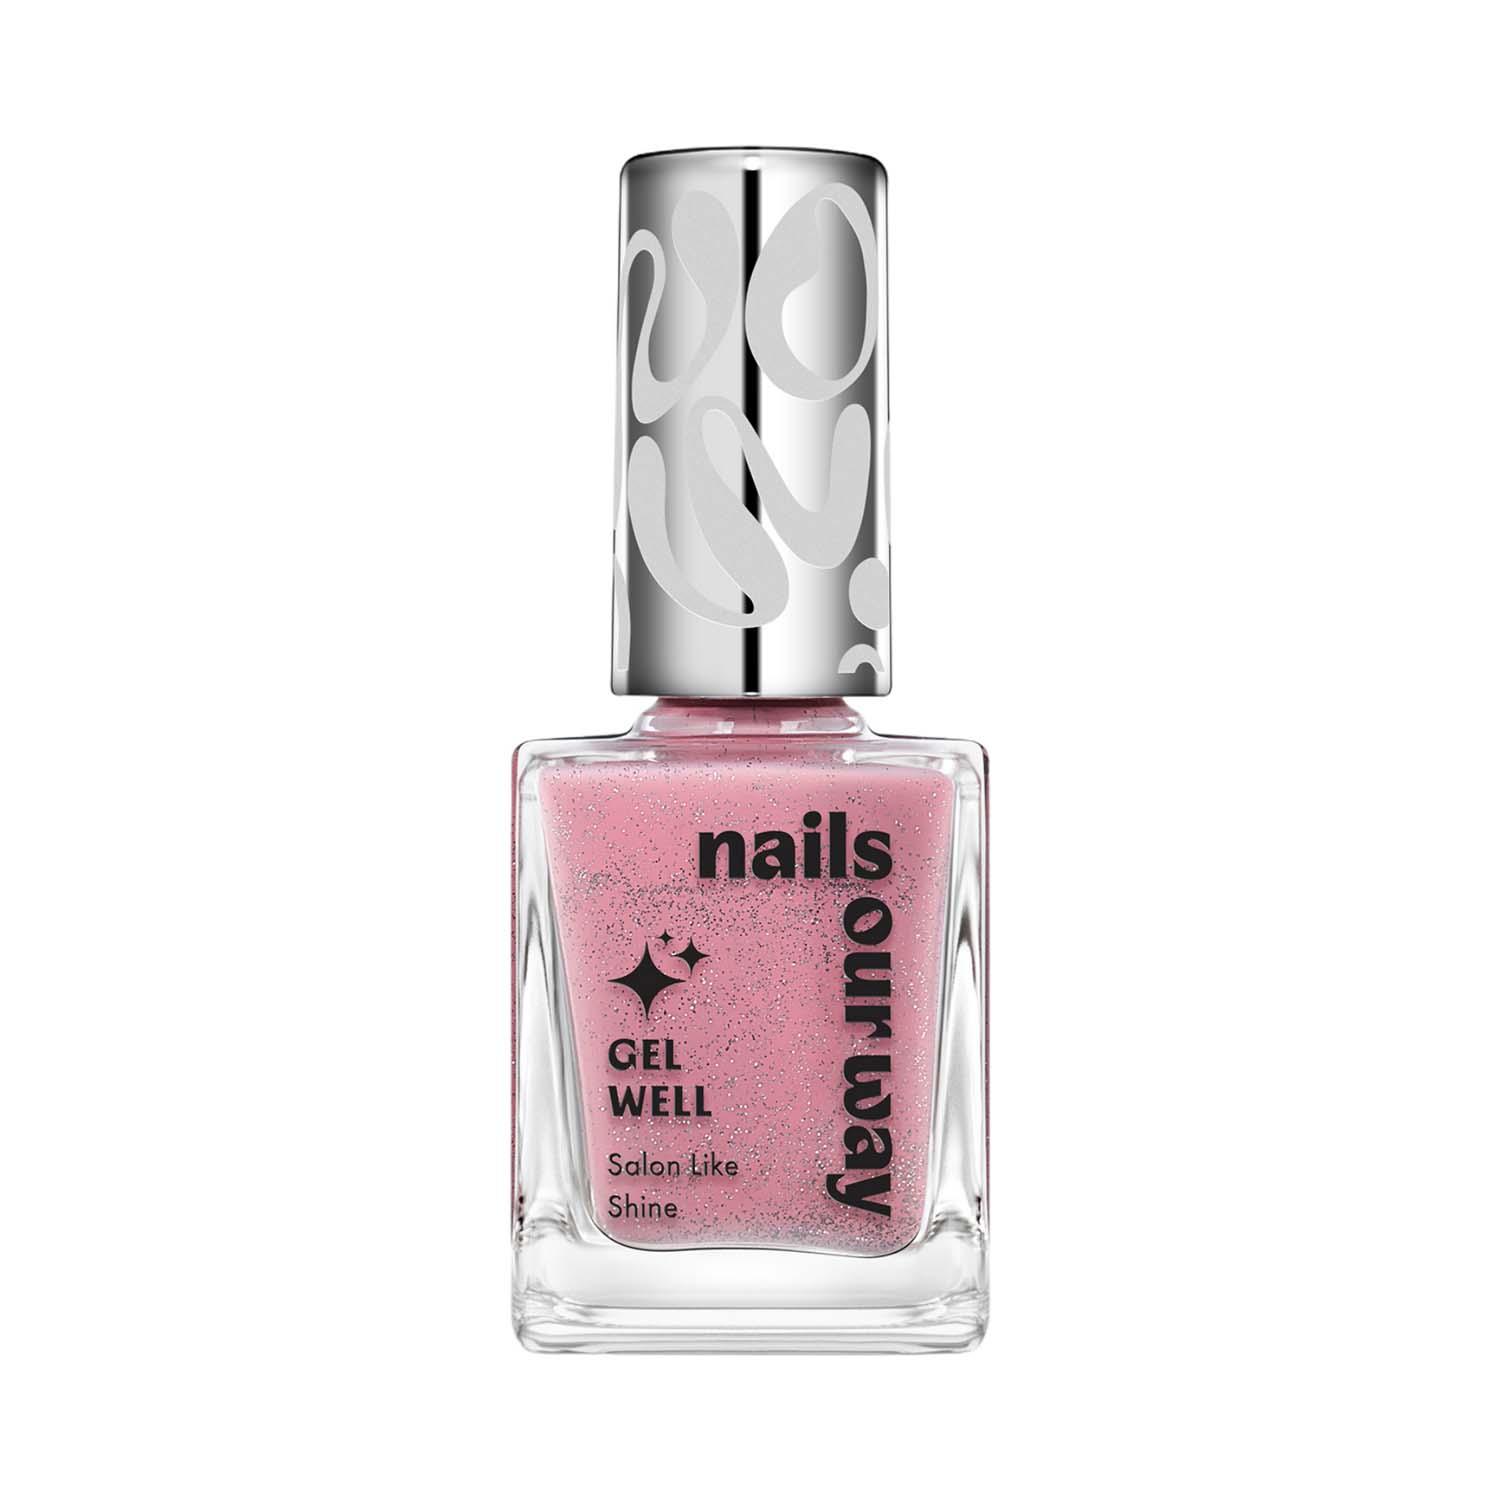 Nails Our Way | Nails Our Way Gel Well Nail Enamel - 204 Spirited (10 ml)